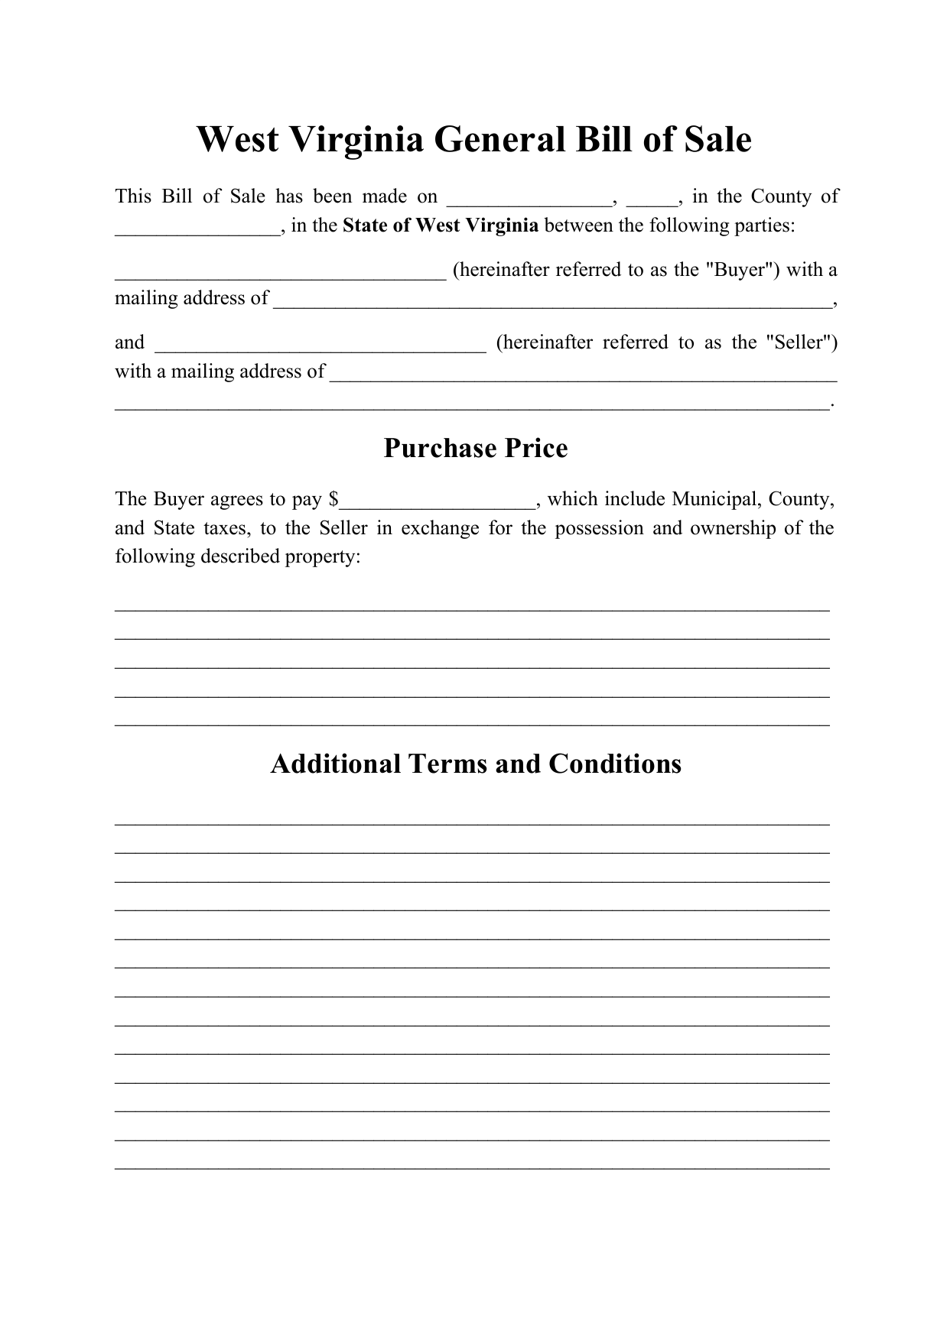 Generic Bill of Sale Form - West Virginia, Page 1